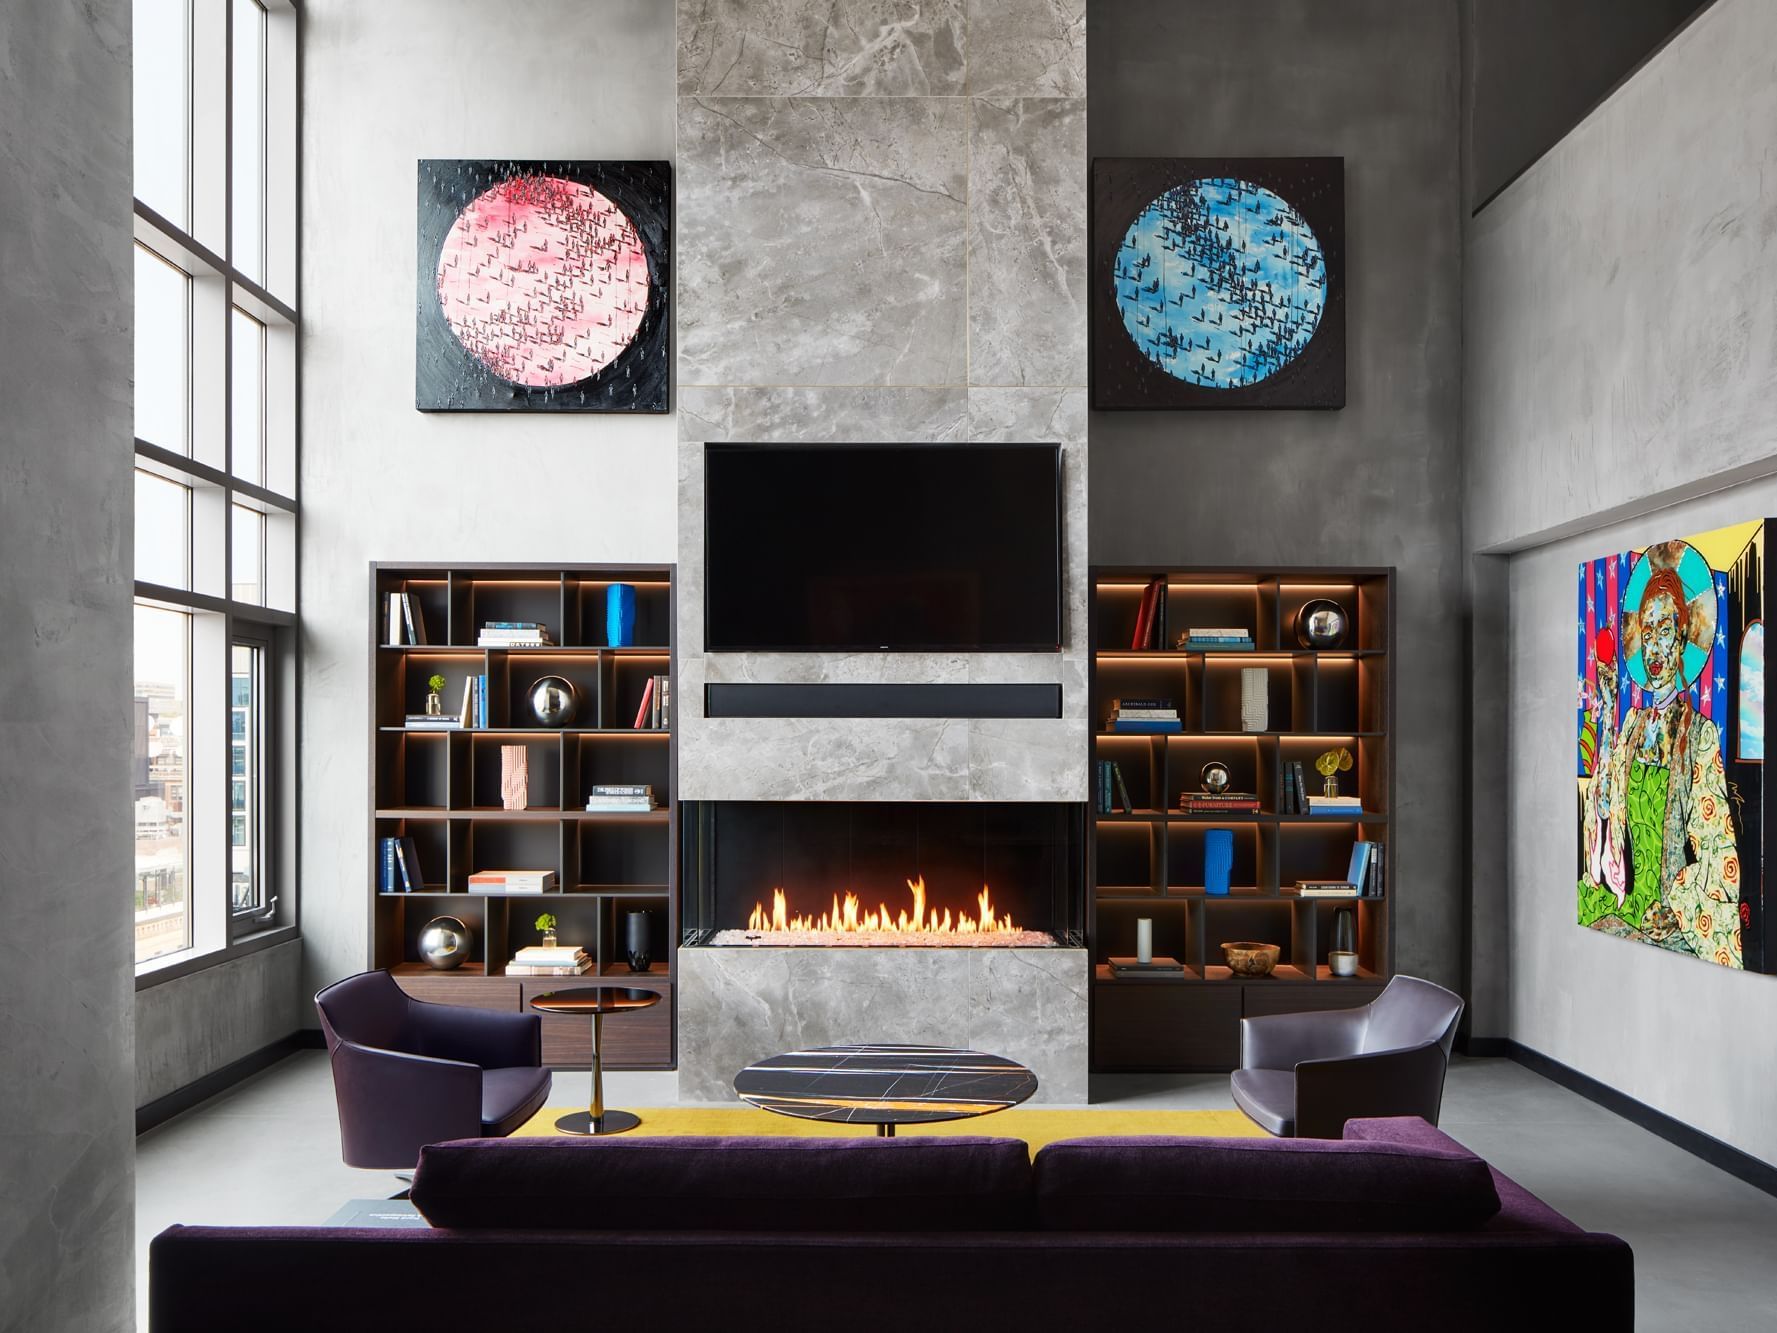 Penthouse suite with couch, chairs, a tv, bookshelves, and art on the wall